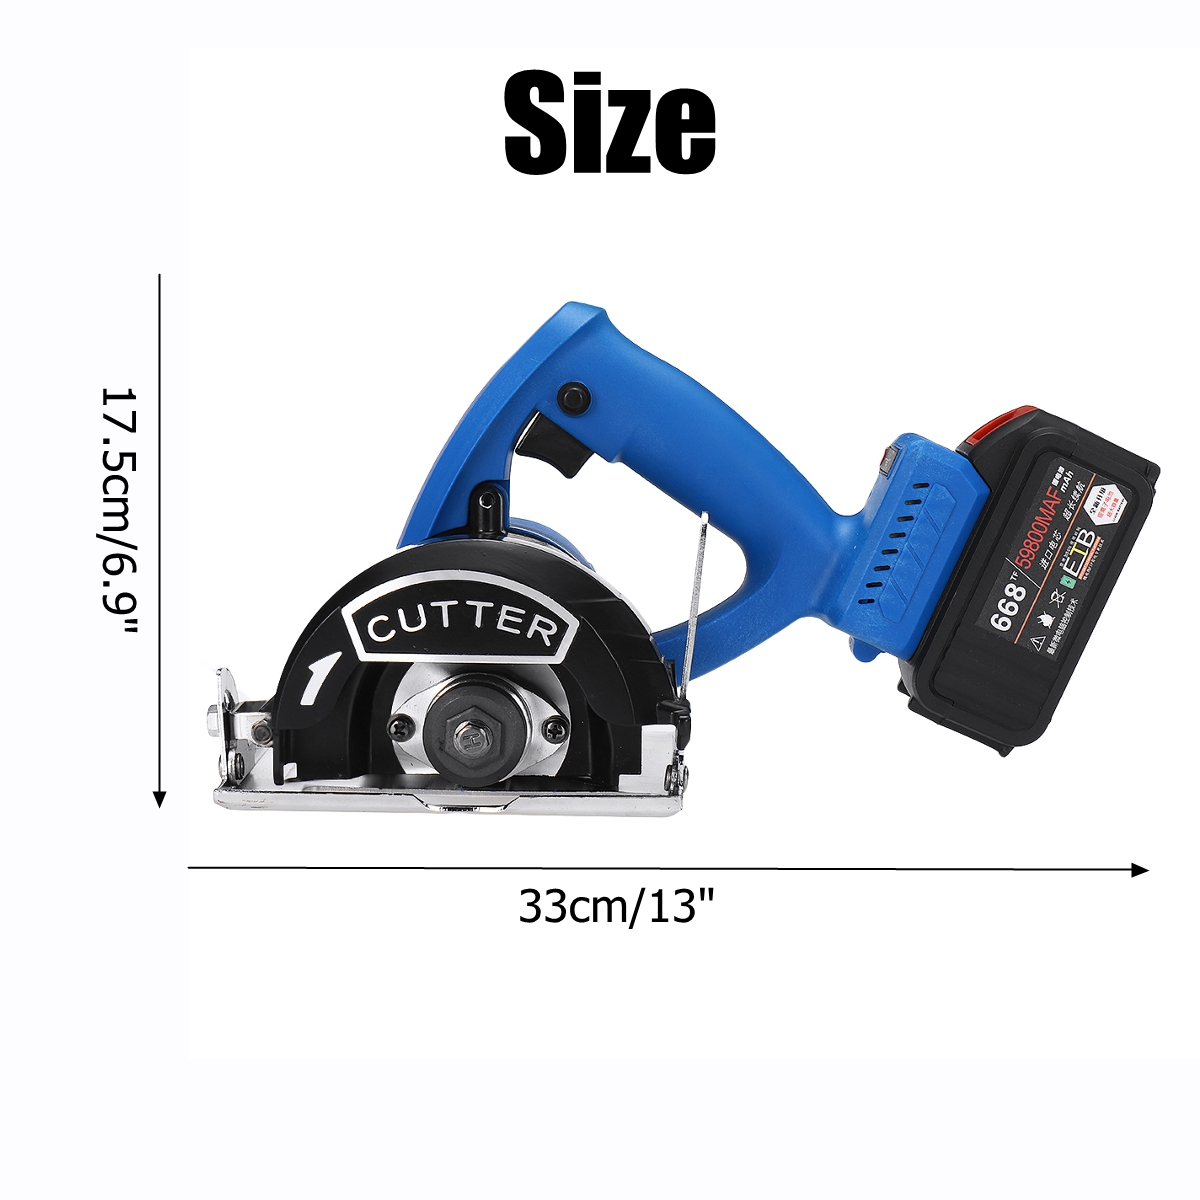 668TF 59800mAh 1500W Cordless Circular Saw Electric Brushless Saw Blade Saw Woodworking Tools Rechargeable Metal Tile Cutting Machine Saws 14